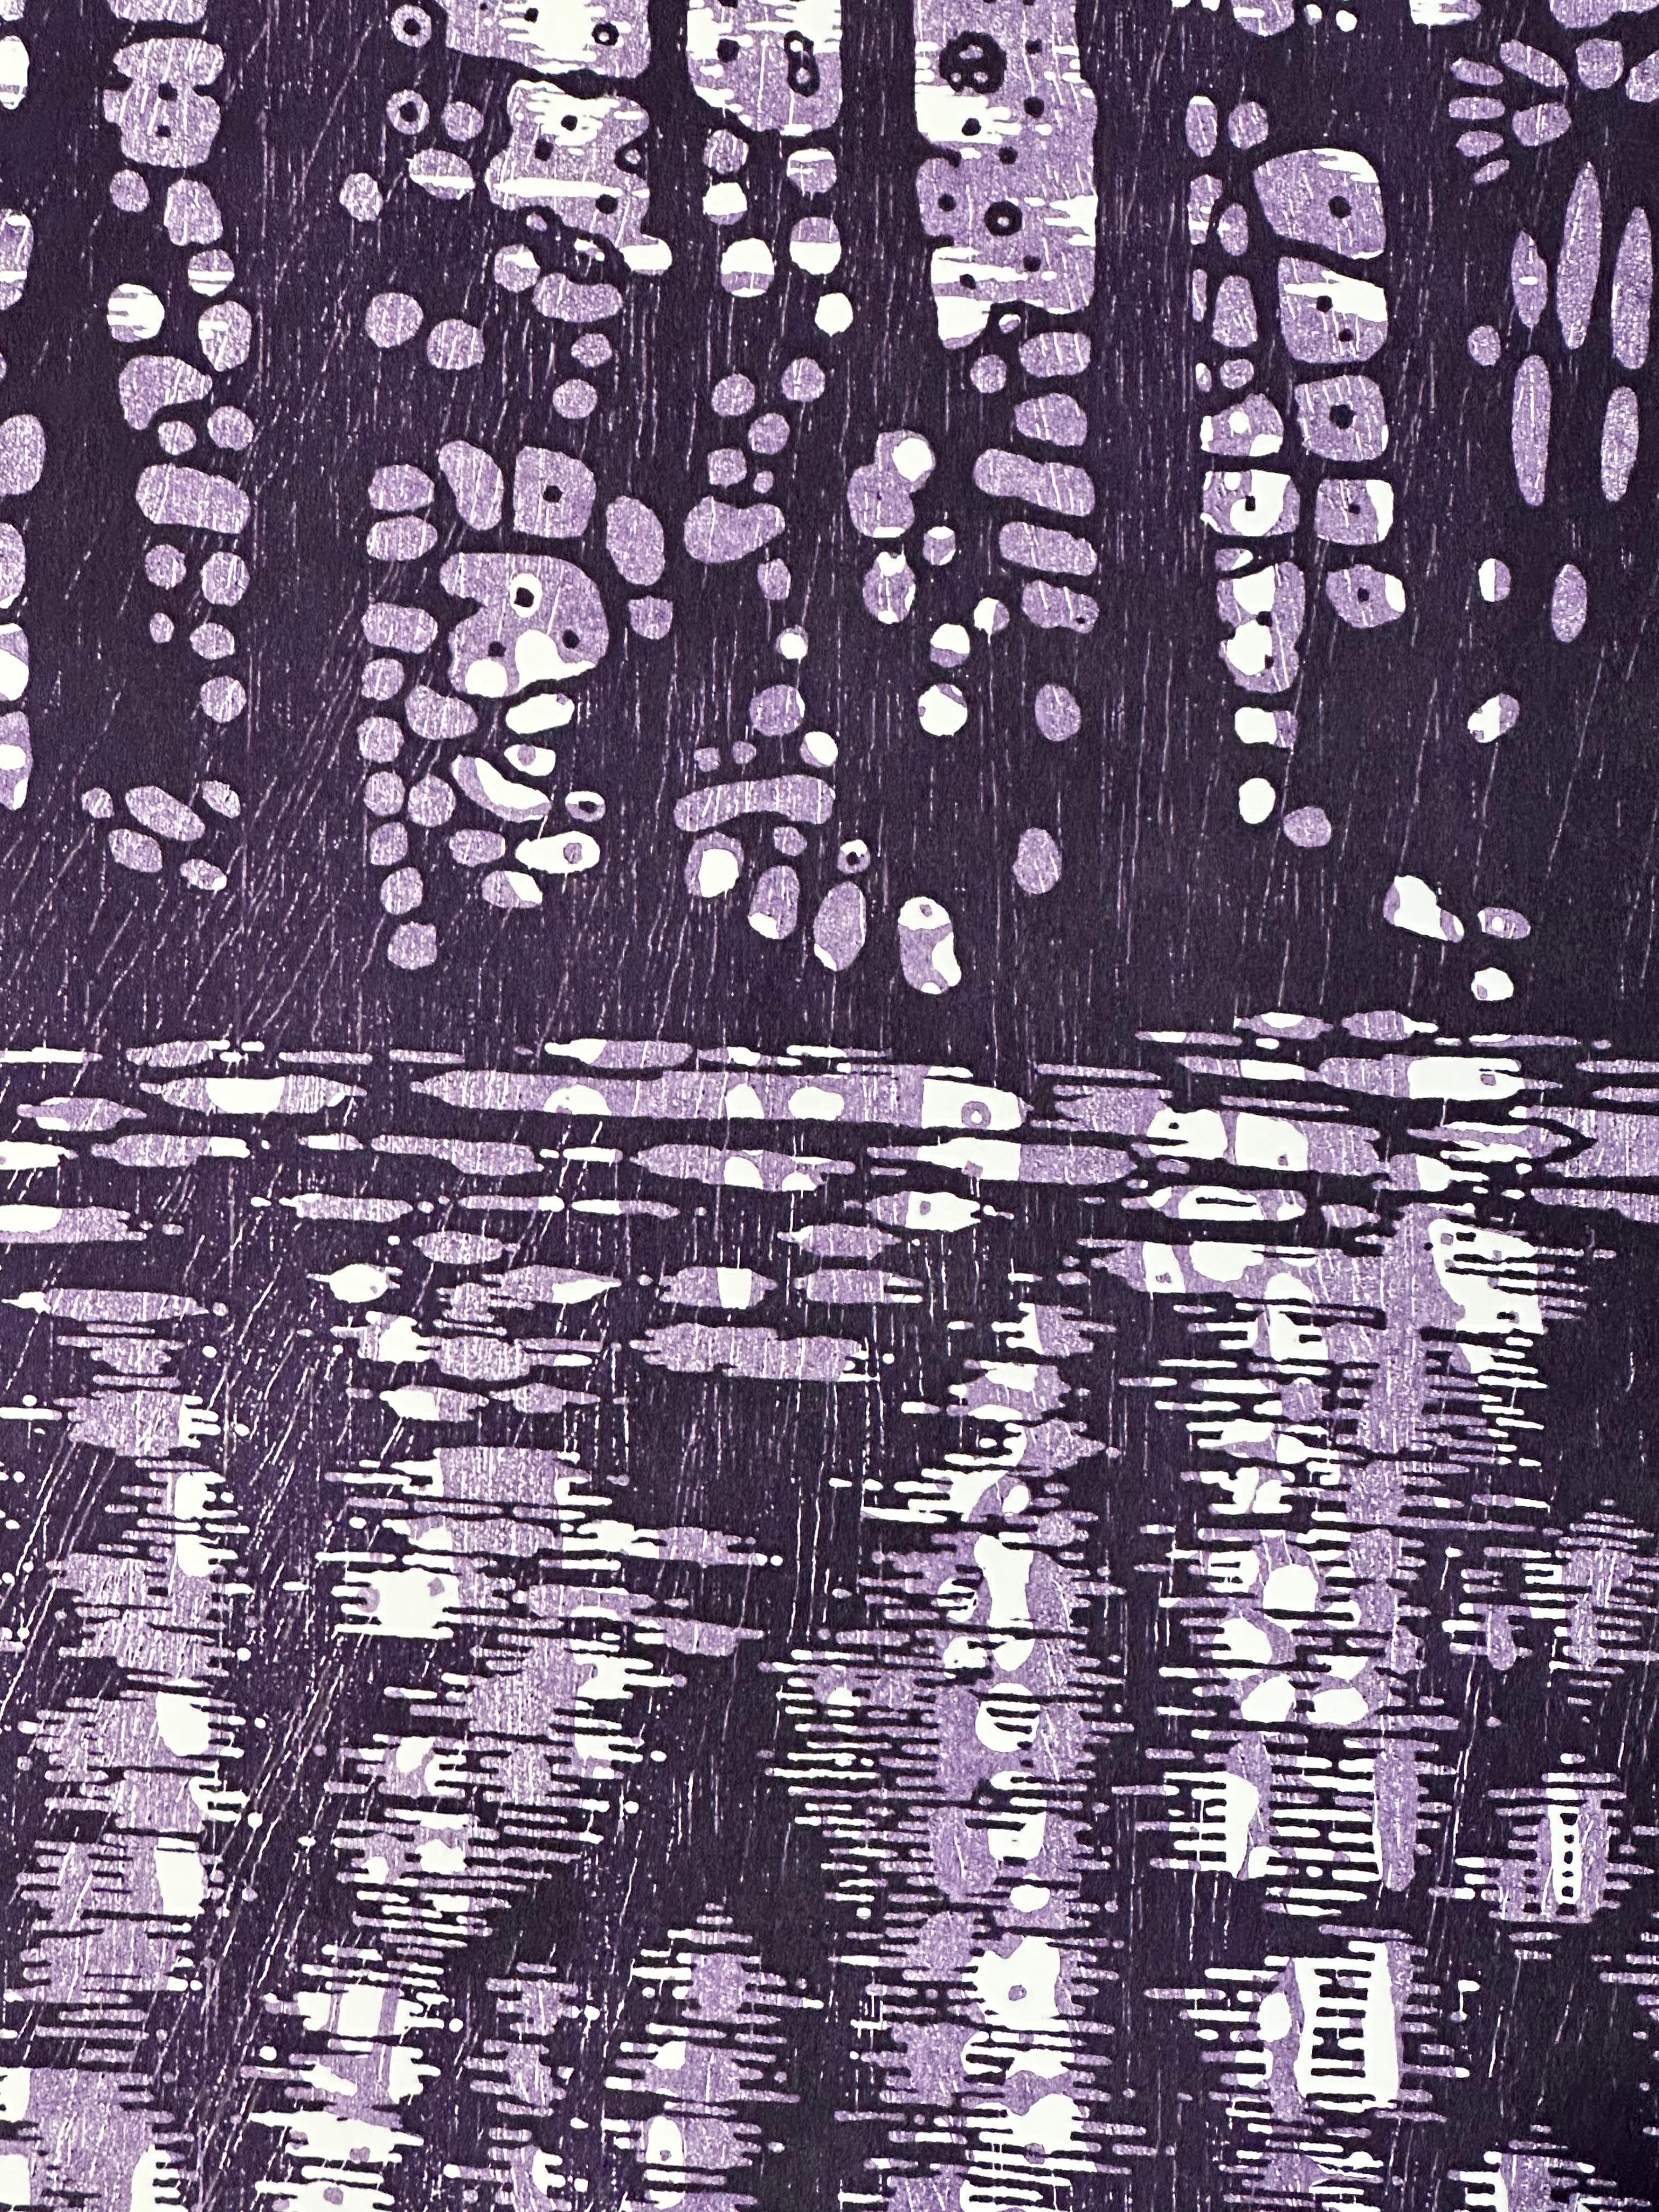 This square woodcut print on paper evokes the peacefulness of looking across a stream towards a thicket of trees in a forest in shades of violet, from lilac to dark eggplant. The monotype brings to mind the tradition of Japanese printing while being